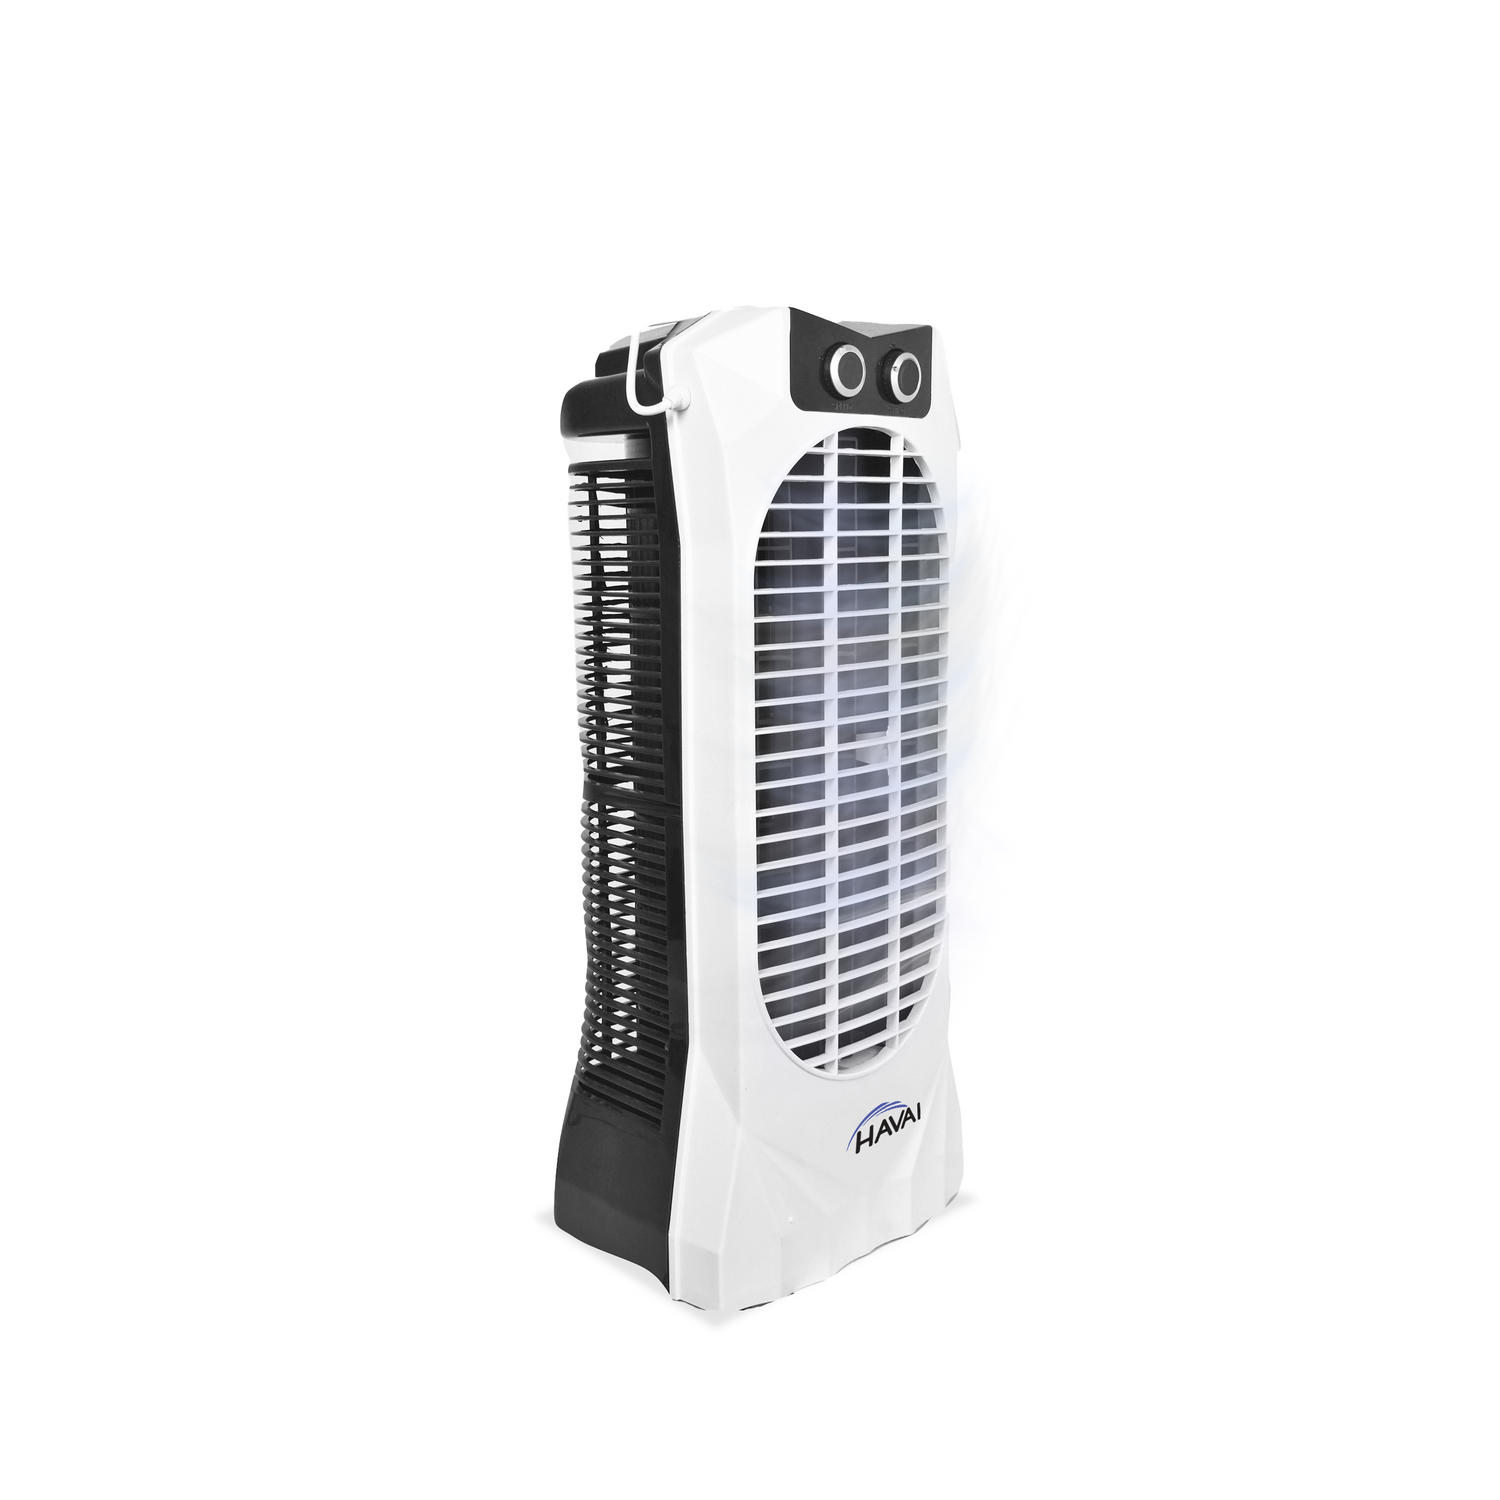 HAVAI Coral Tower Fan - White and Black